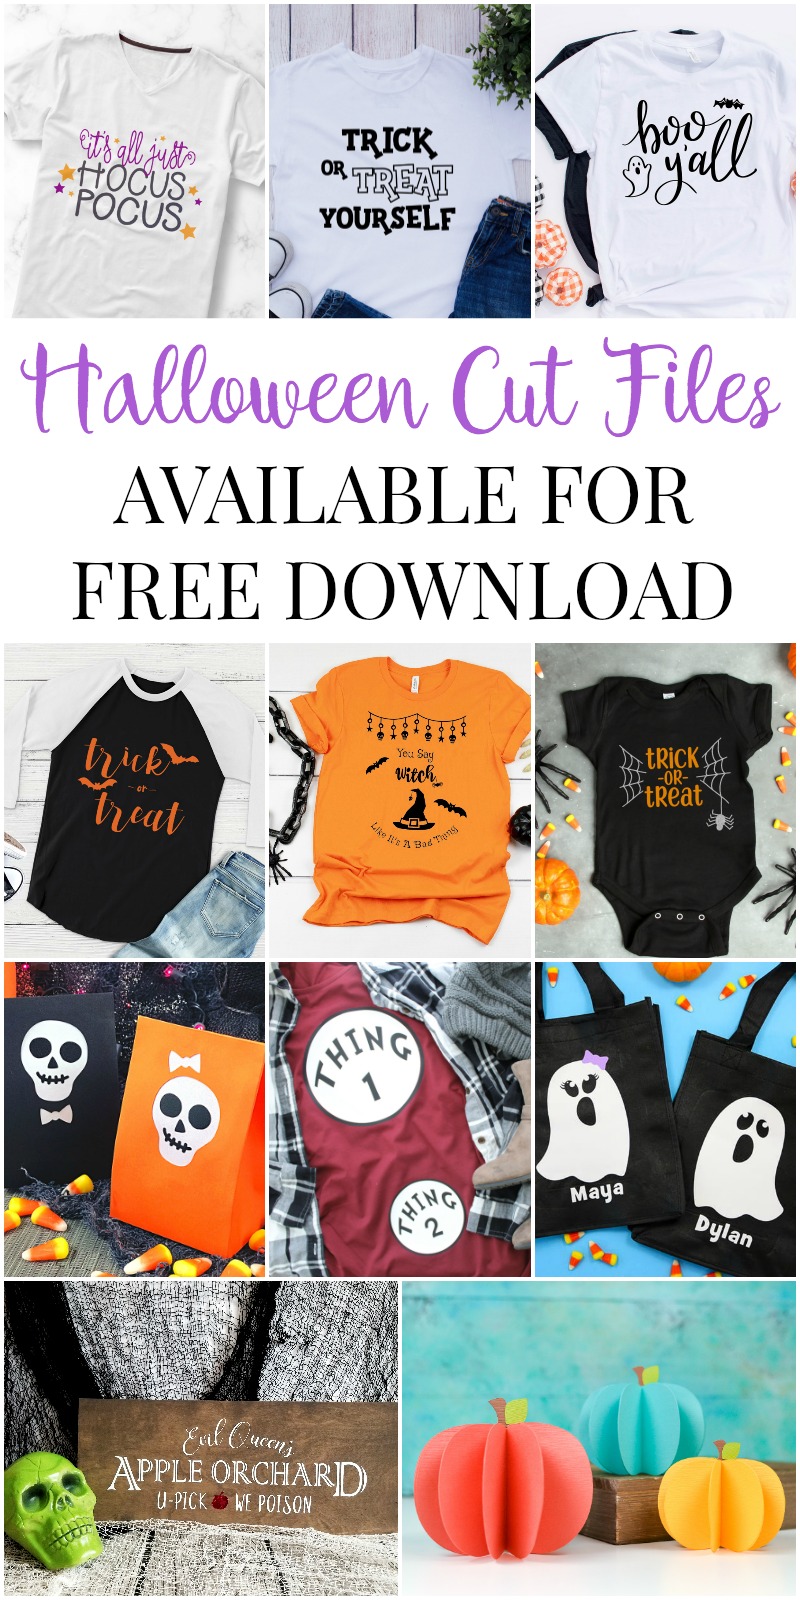 Download Halloween Maternity Shirt: Dr. Seuss Inspired - The ...